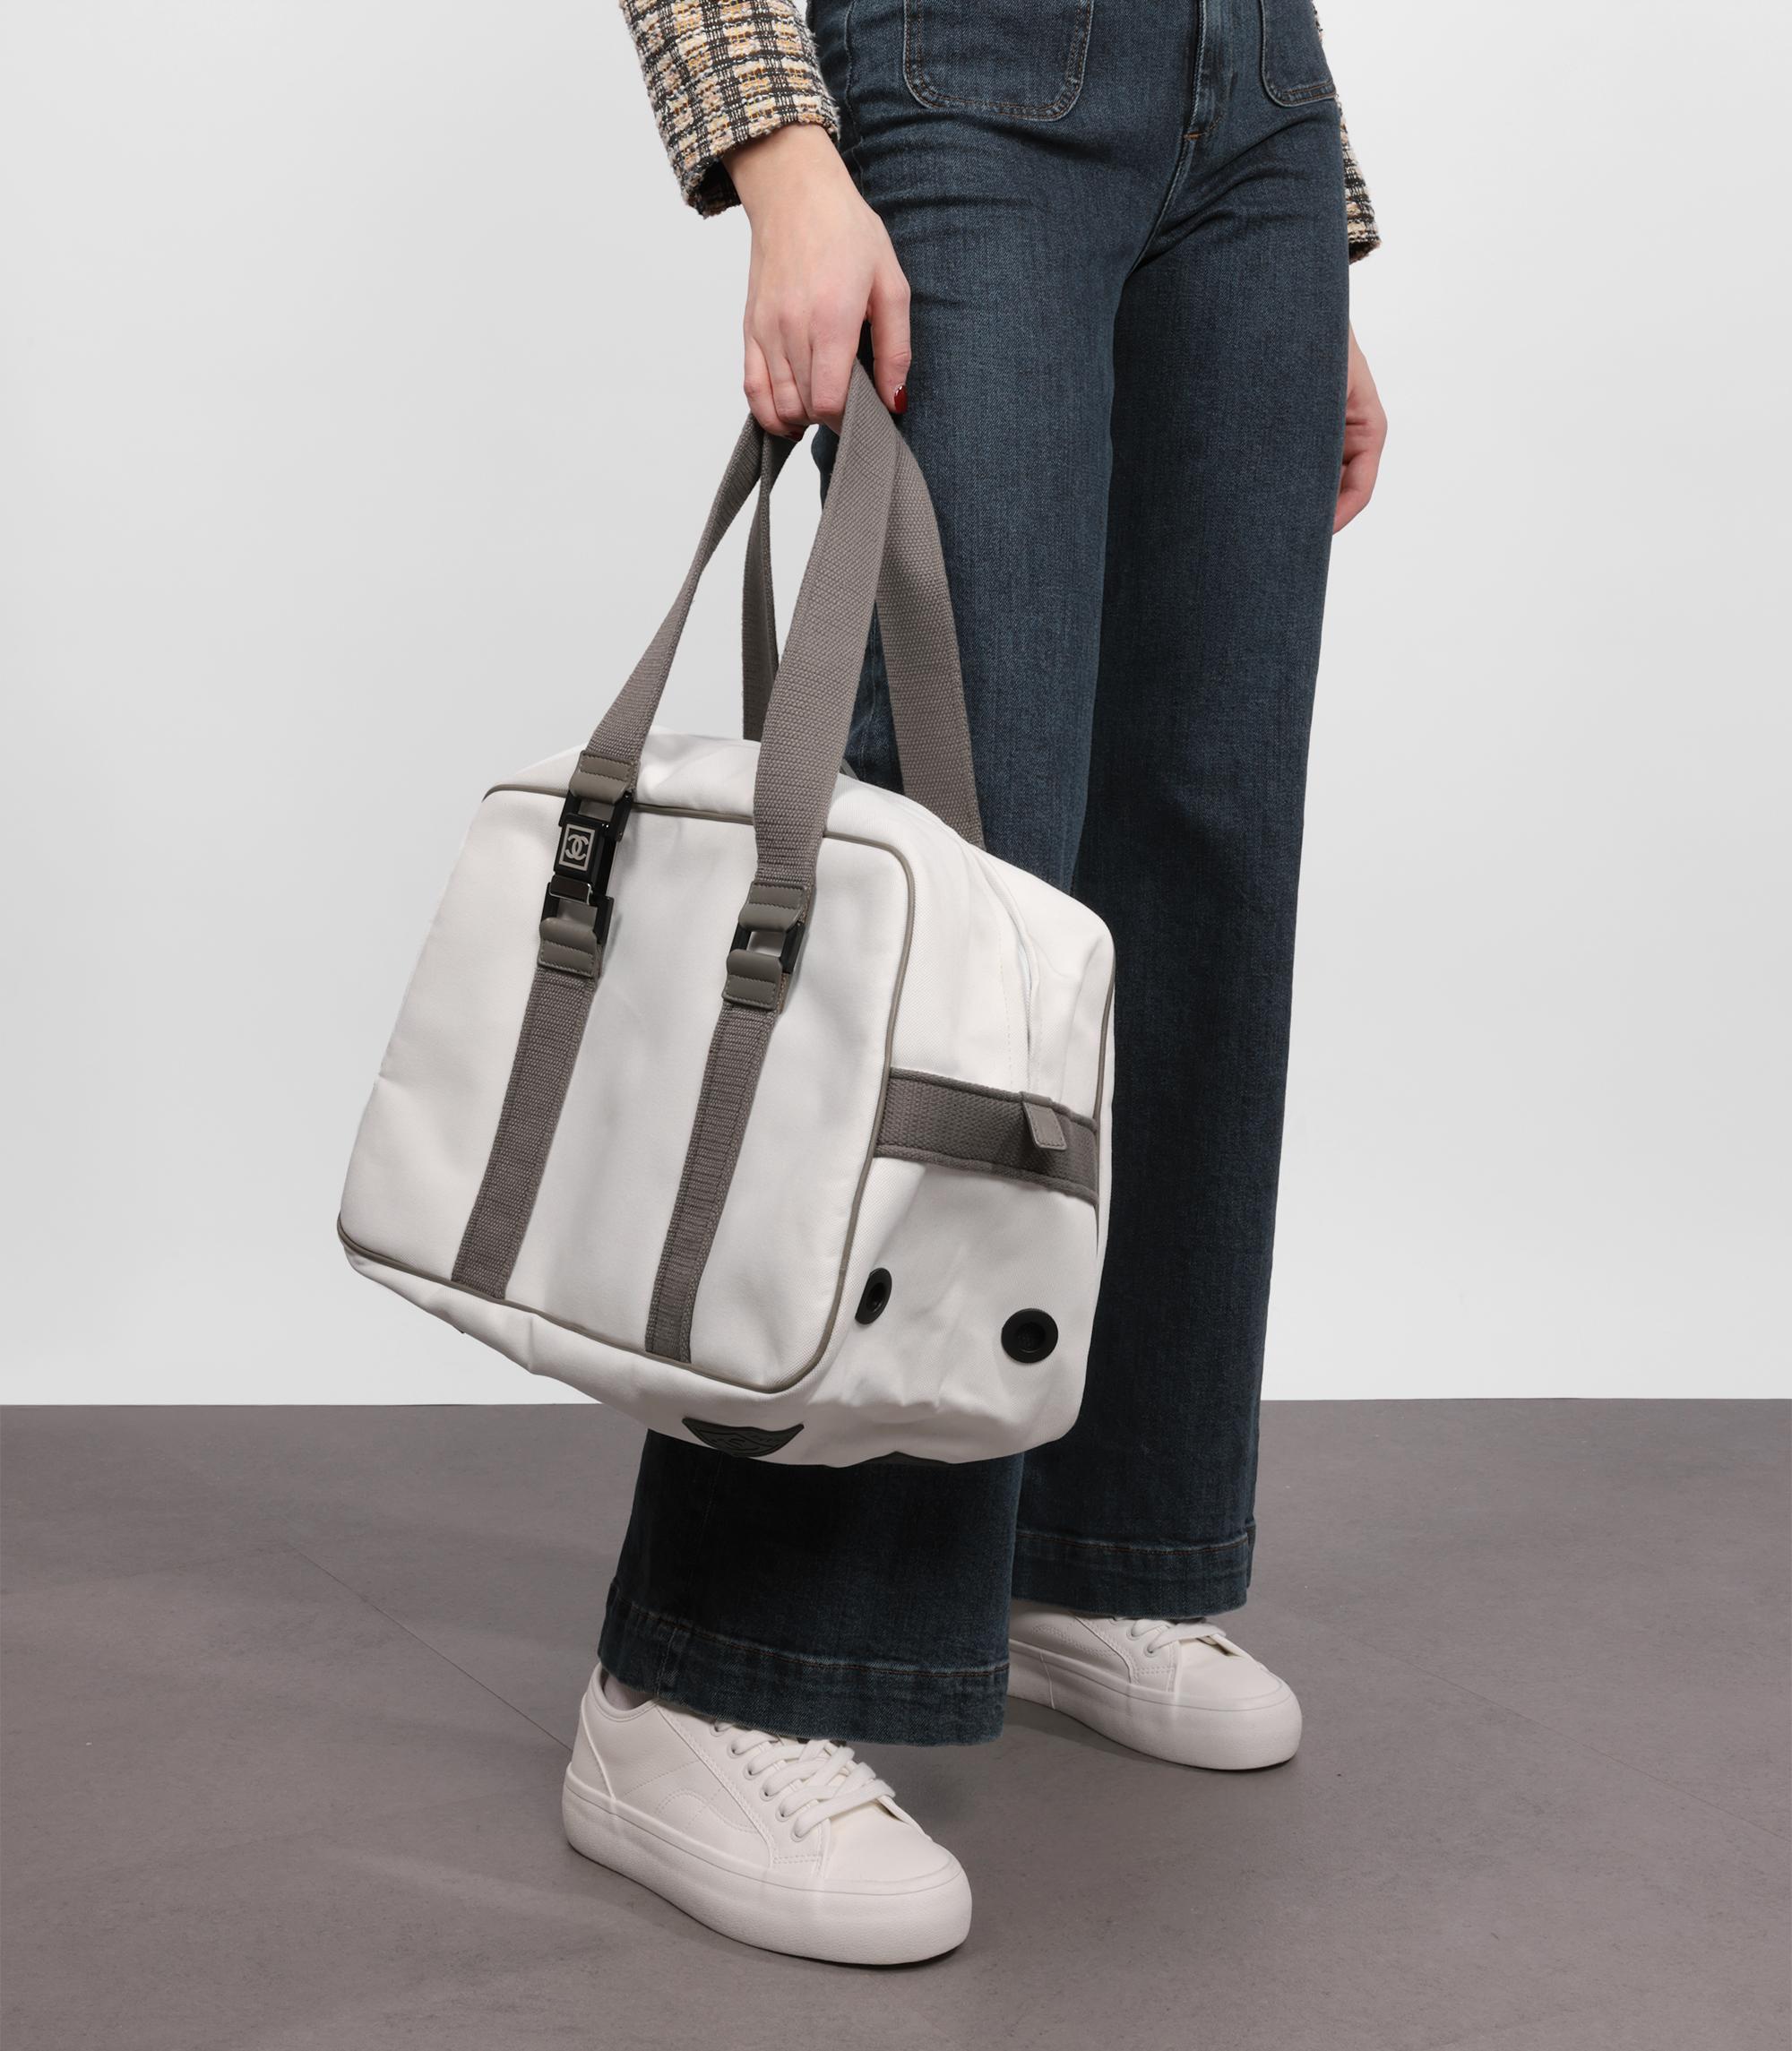 Chanel White Canvas Vintage Sports Line Boston 40

Brand- Chanel
Model- Sports Line Boston 40
Product Type- Tote
Serial Number- 96*****
Age- Circa 2004
Accompanied By- Chanel Dust Bag
Colour- White
Hardware- Silver
Material(s)- Canvas
Authenticity